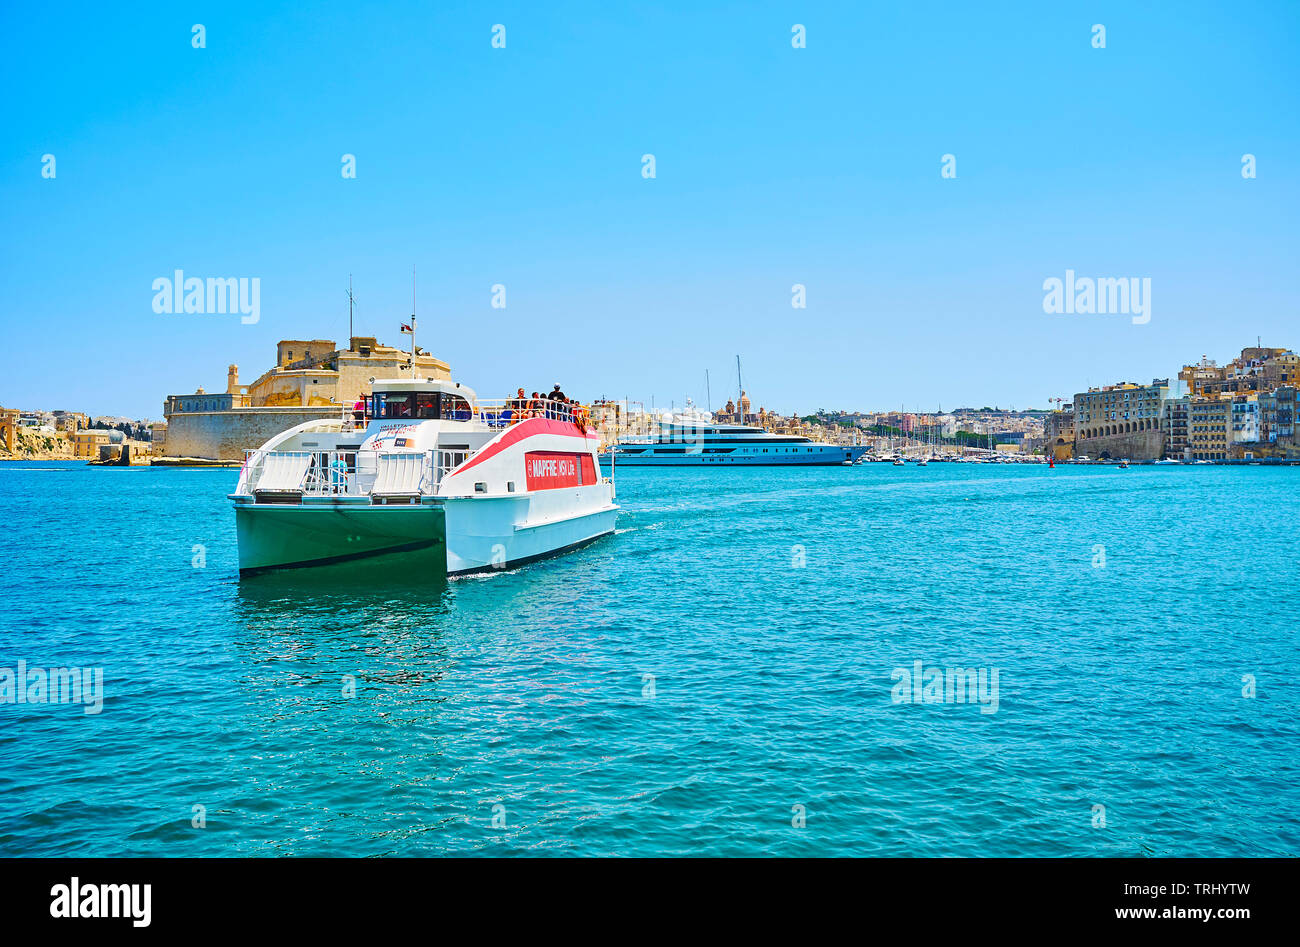 VALLETTA, MALTA - JUNE 19, 2018: The passenger ferry floats from Birgu to Valletta across the Grand Harbour with a view on Fort St Angelo on the backg Stock Photo